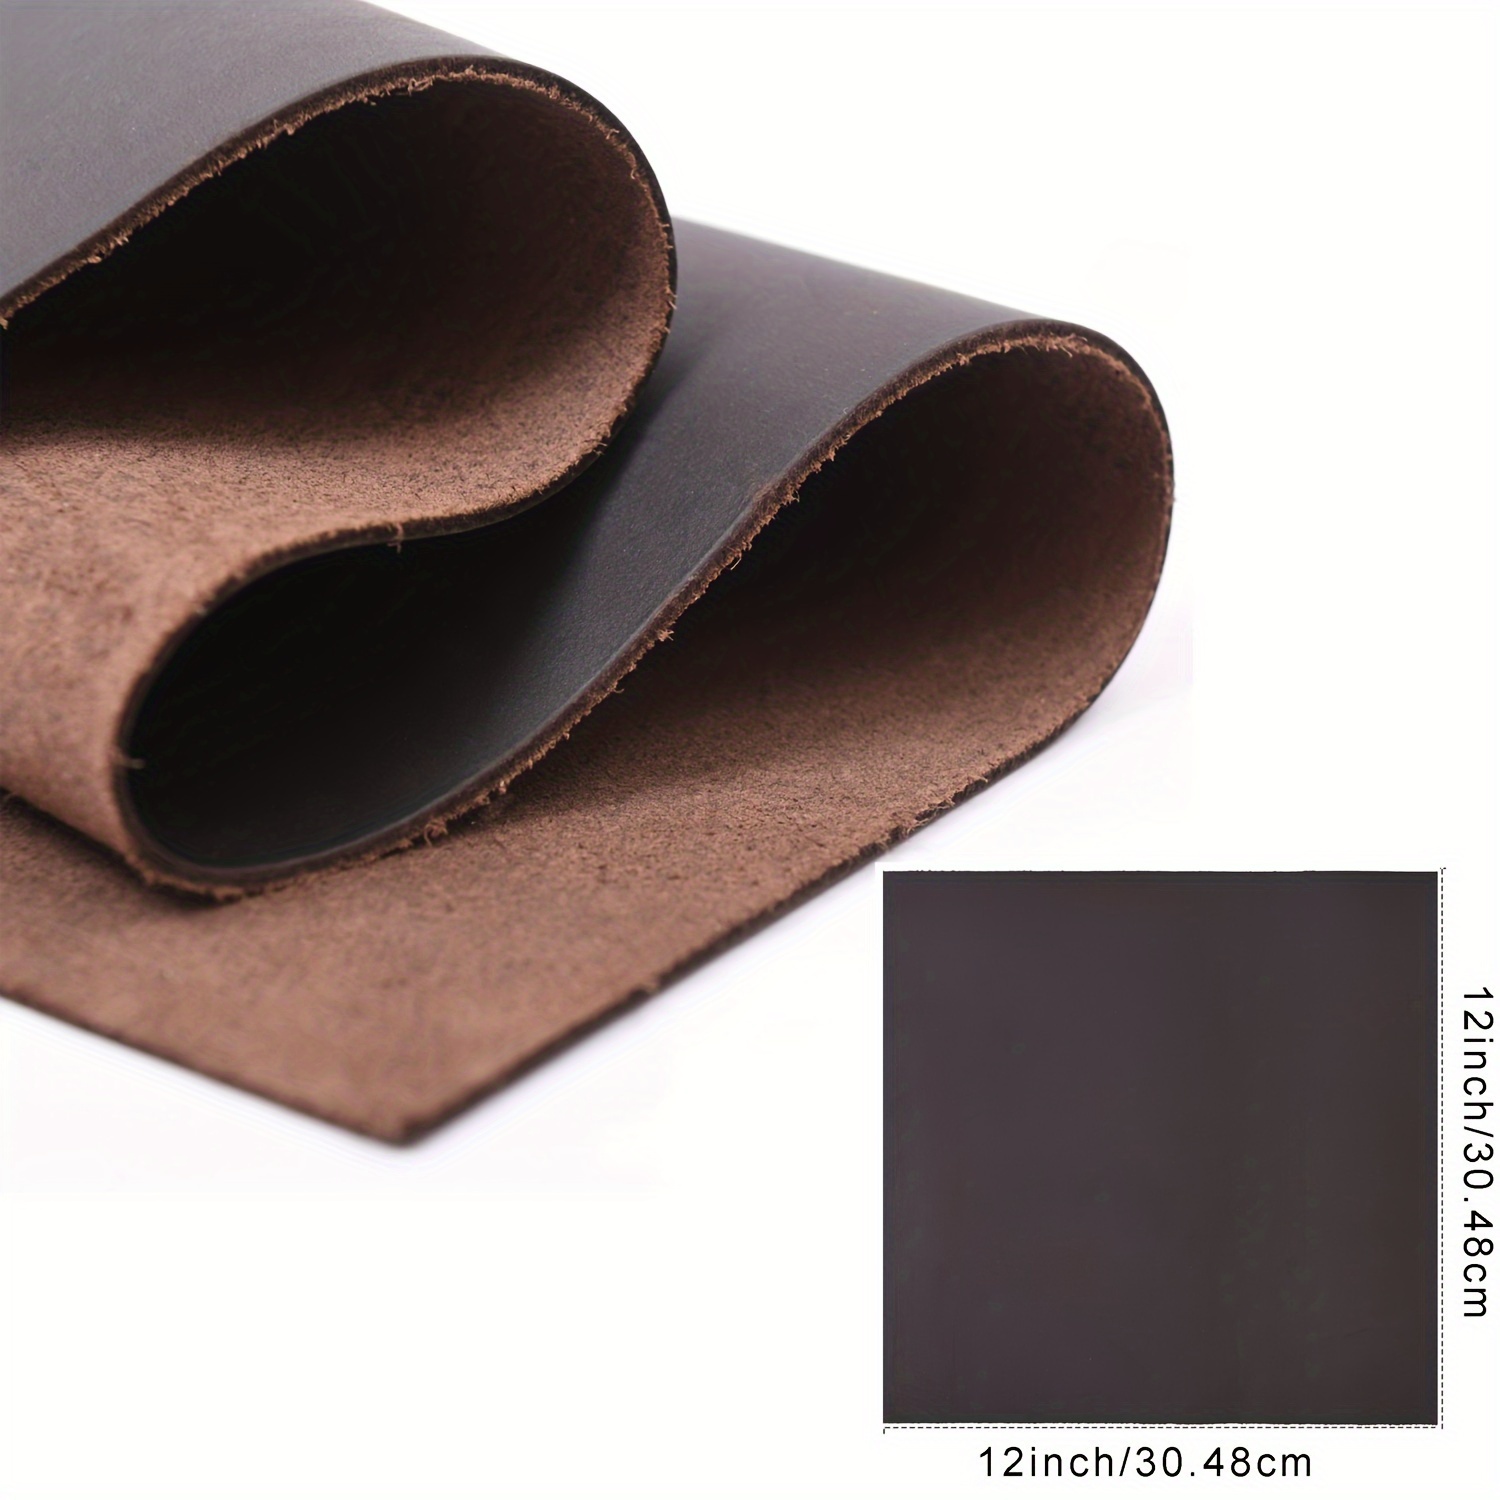 Genique Tooling Leather Sheets for Crafts 2mm Thick Full Grain Leather  Pieces for Crafting, Tooling, Sewing, Carving, DIY Projects, Jewelry Making